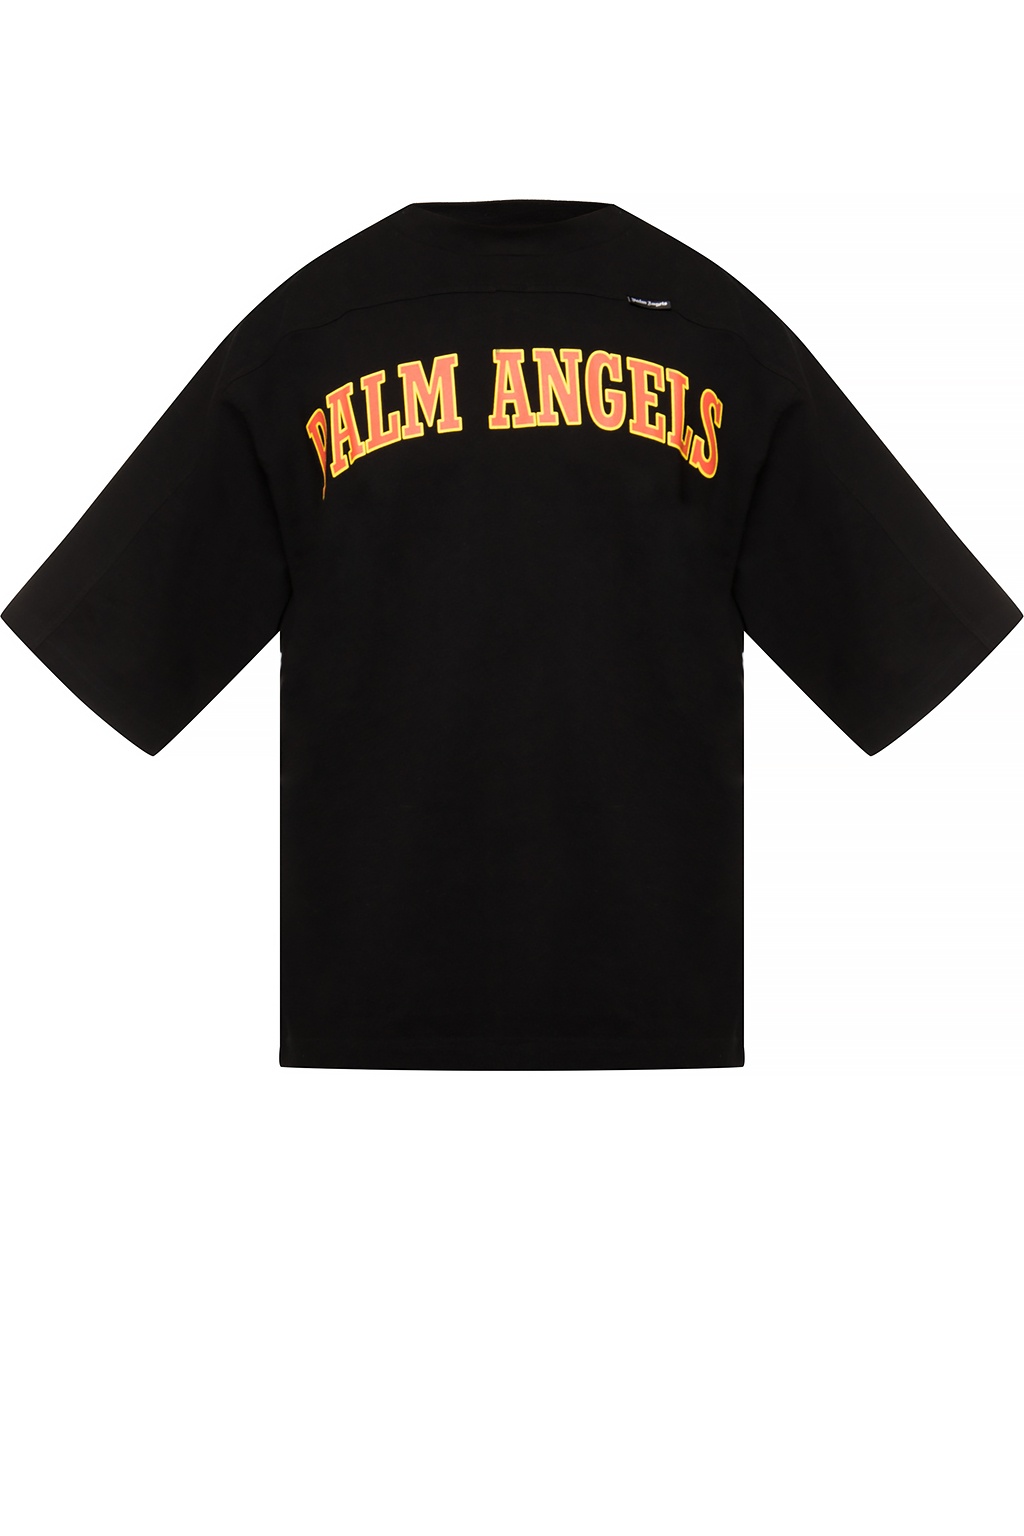 palm angels all over logo t shirt